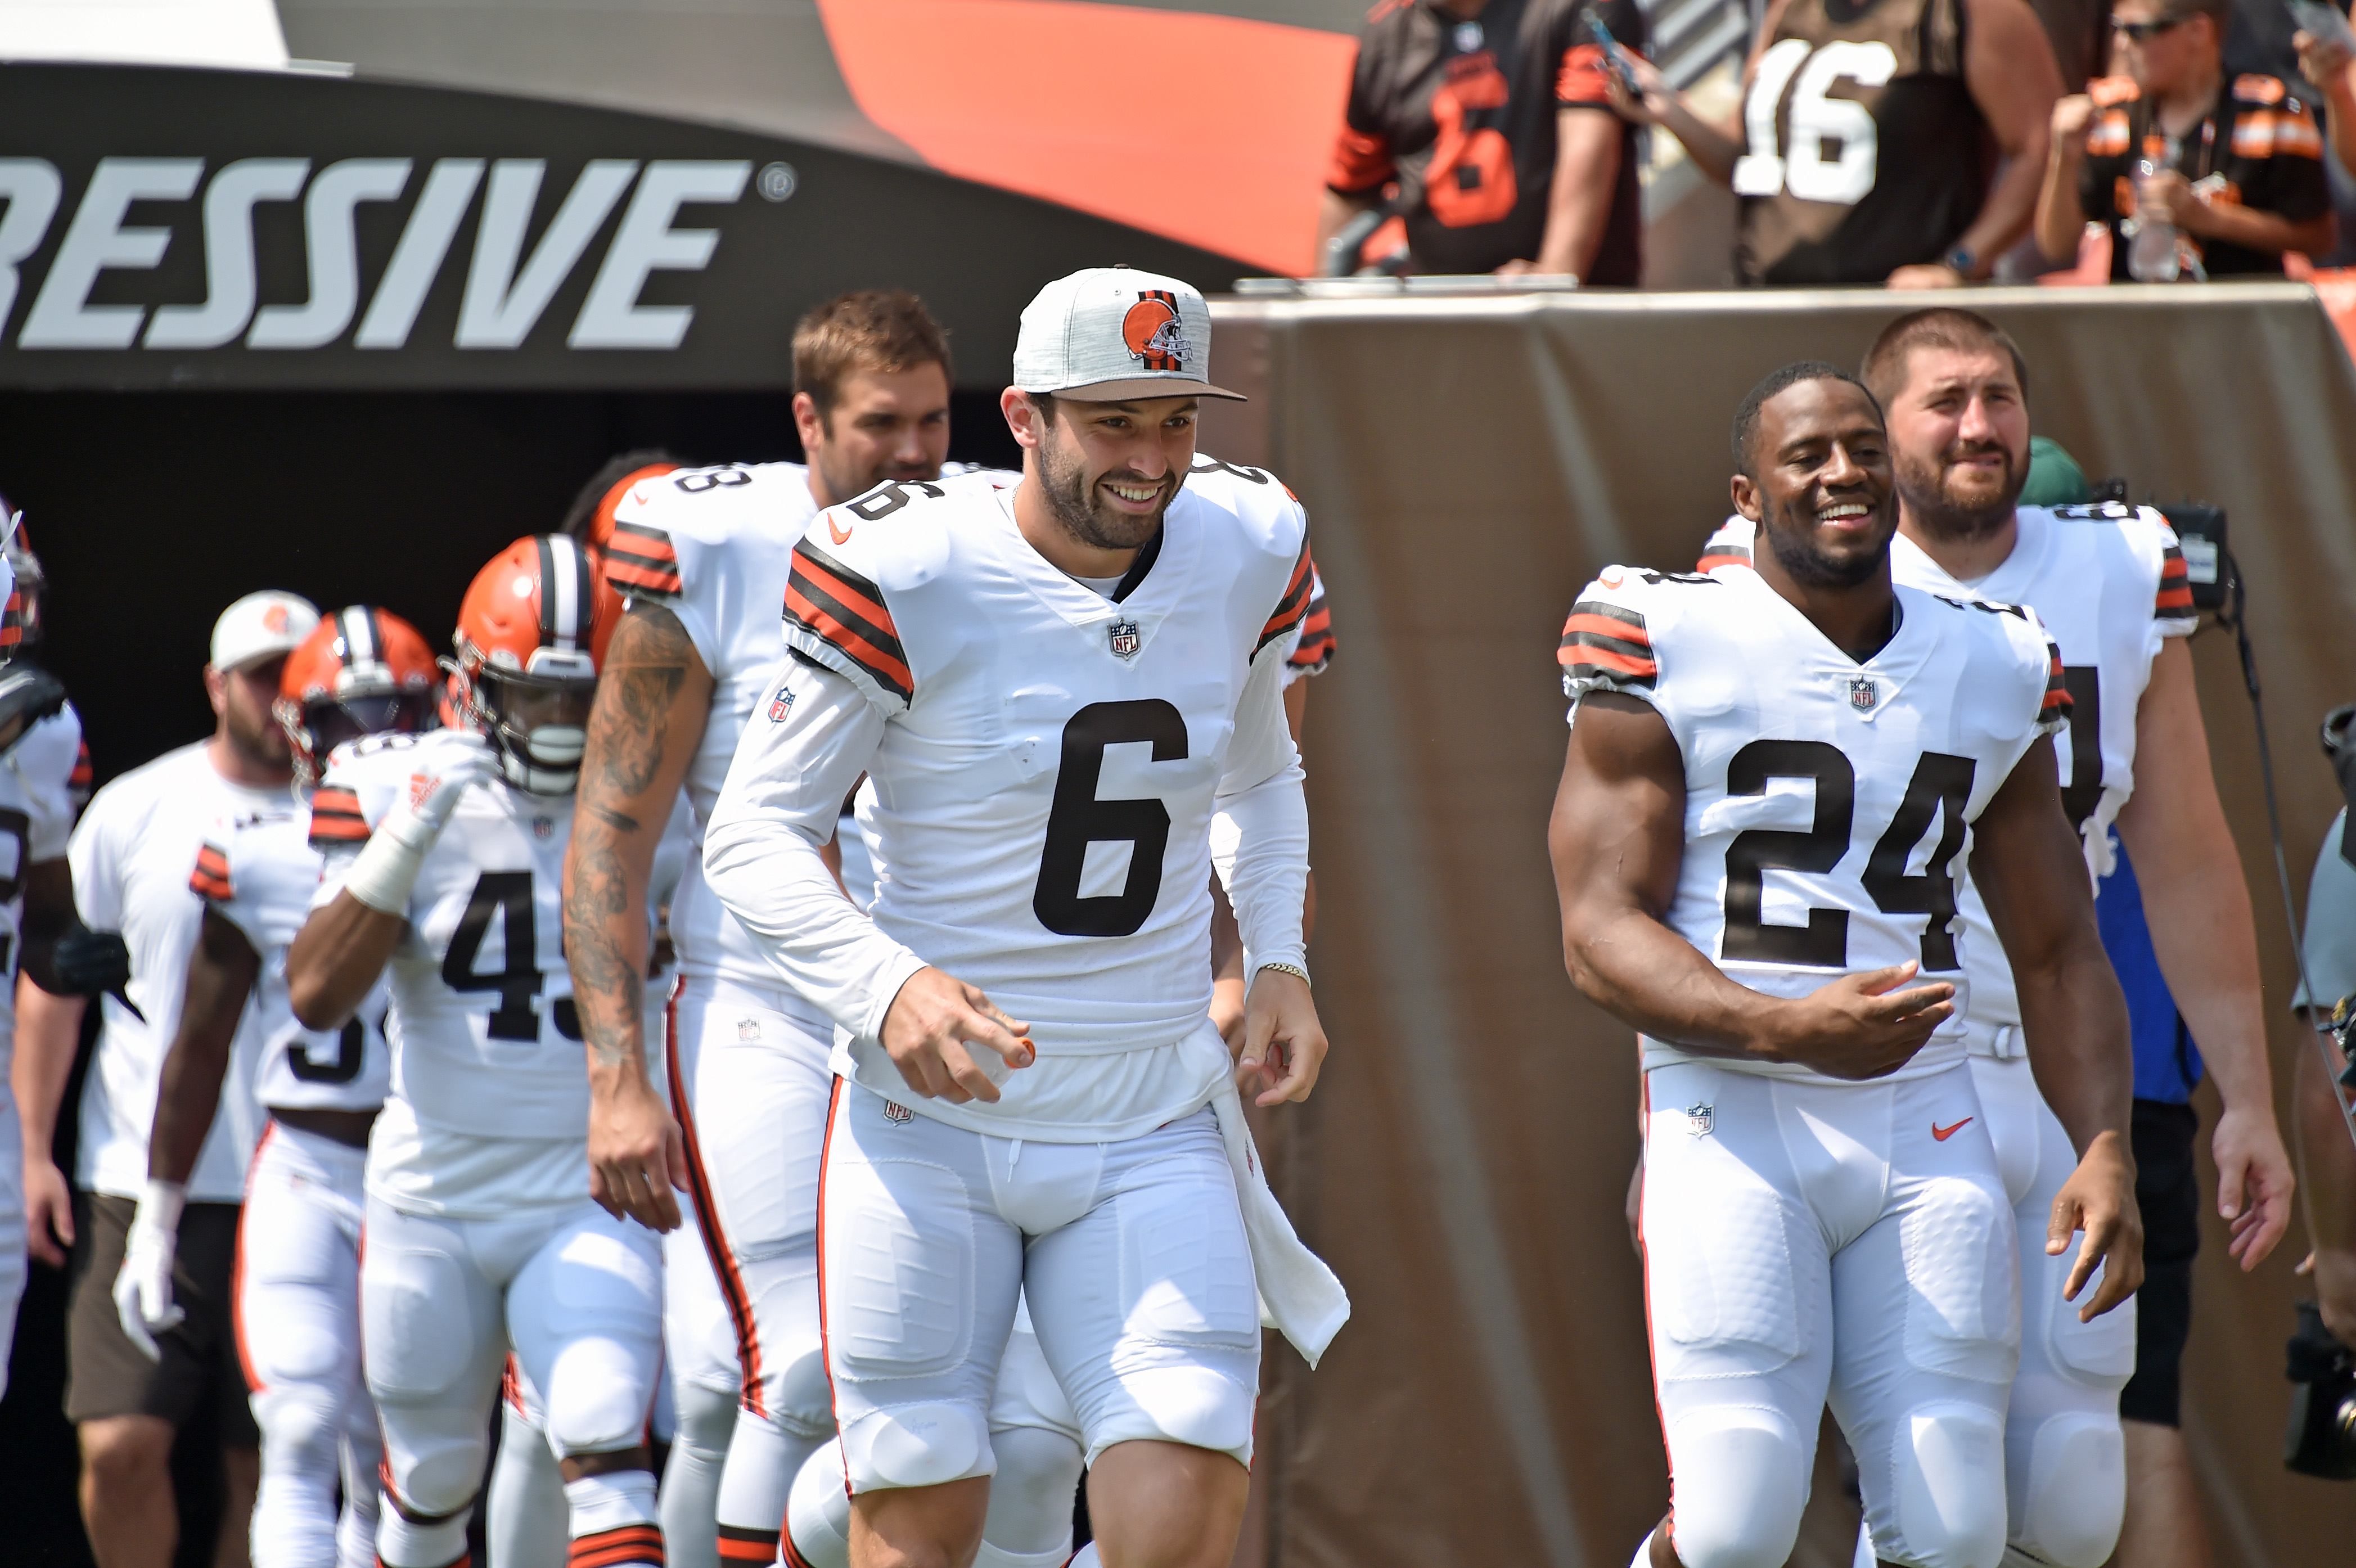 Browns stars Baker Mayfield and Nick Chubb run onto the field ahead of a preseason game